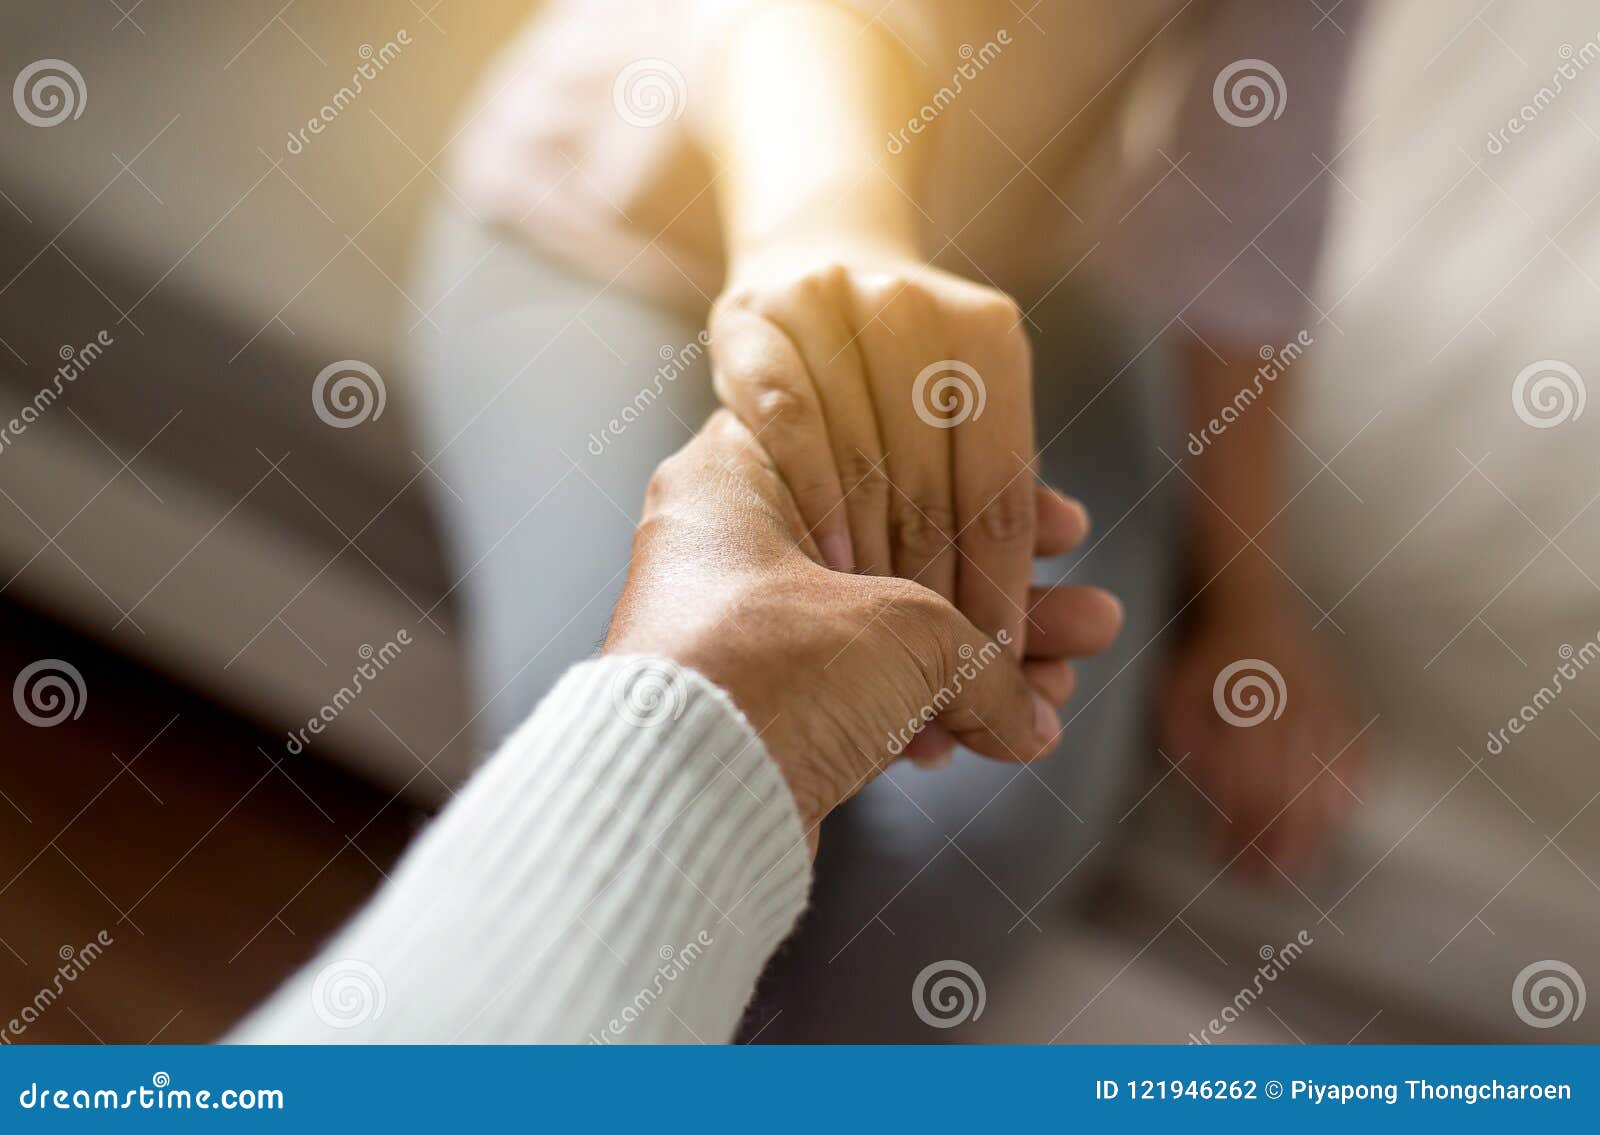 man giving hand to depressed woman,psychiatrist holding hands patient,mental health care concept